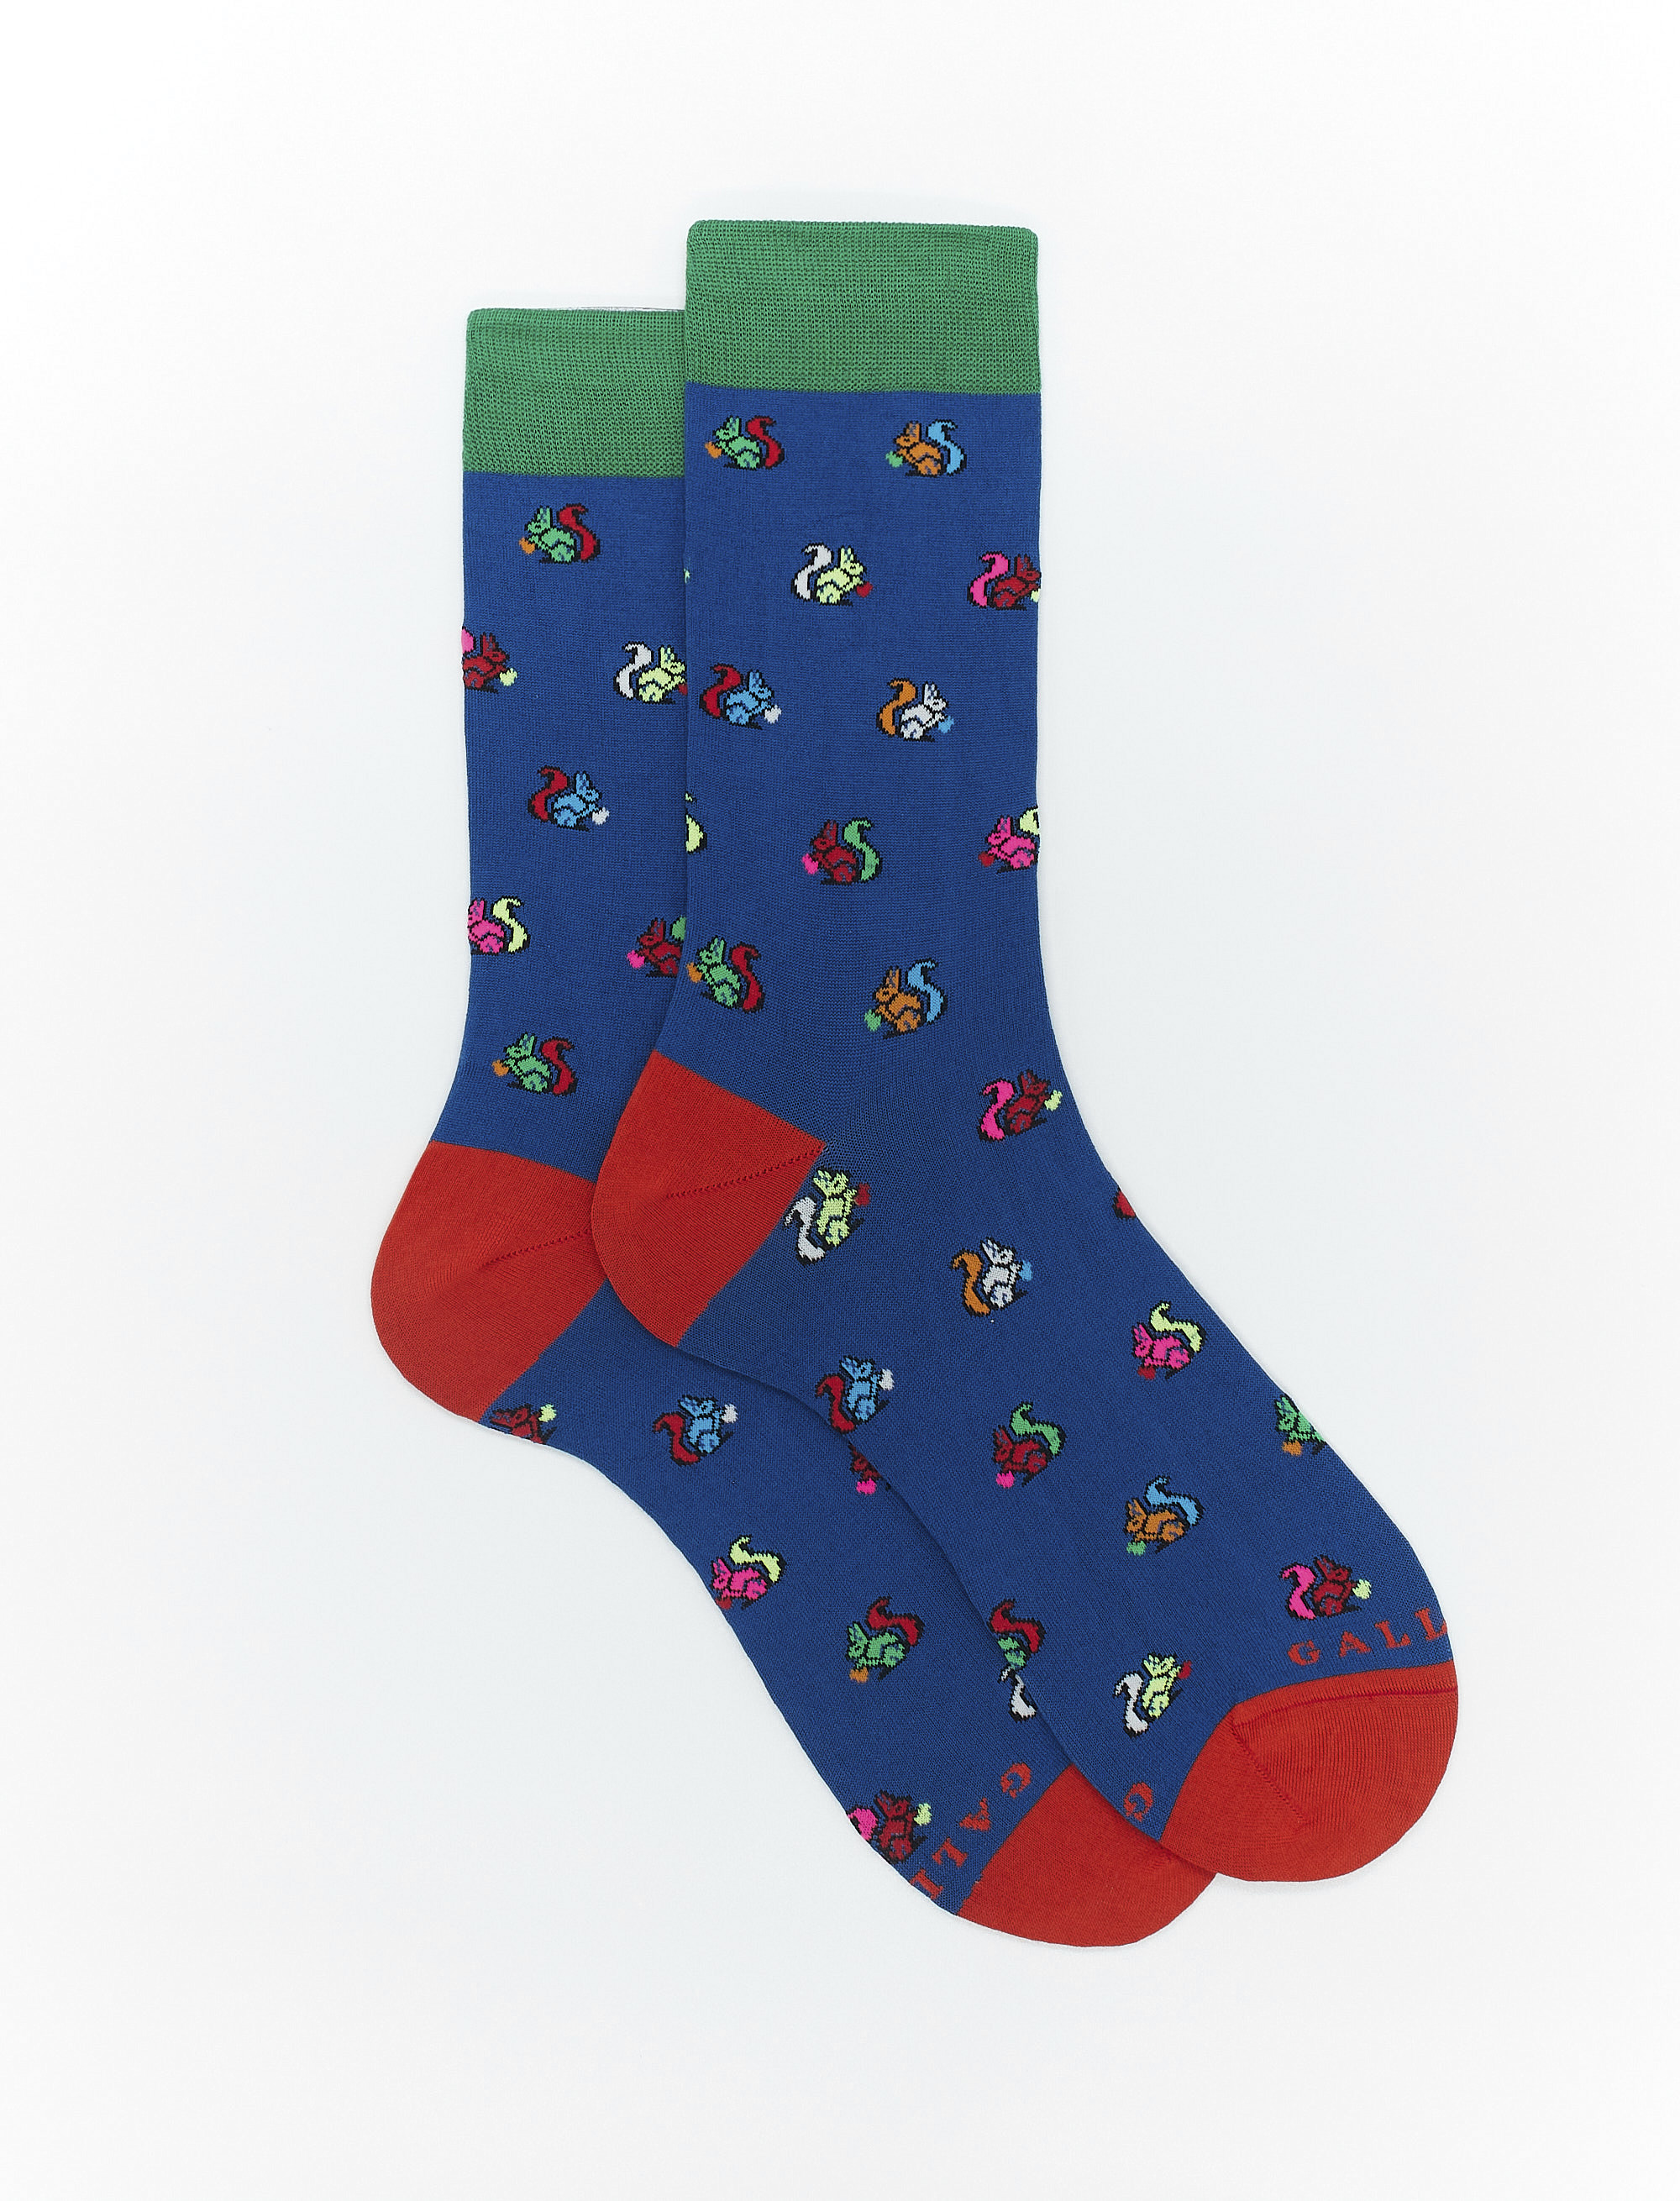 Women's short cosmos blue light cotton socks with squirrel motif - The FW Edition | Gallo 1927 - Official Online Shop